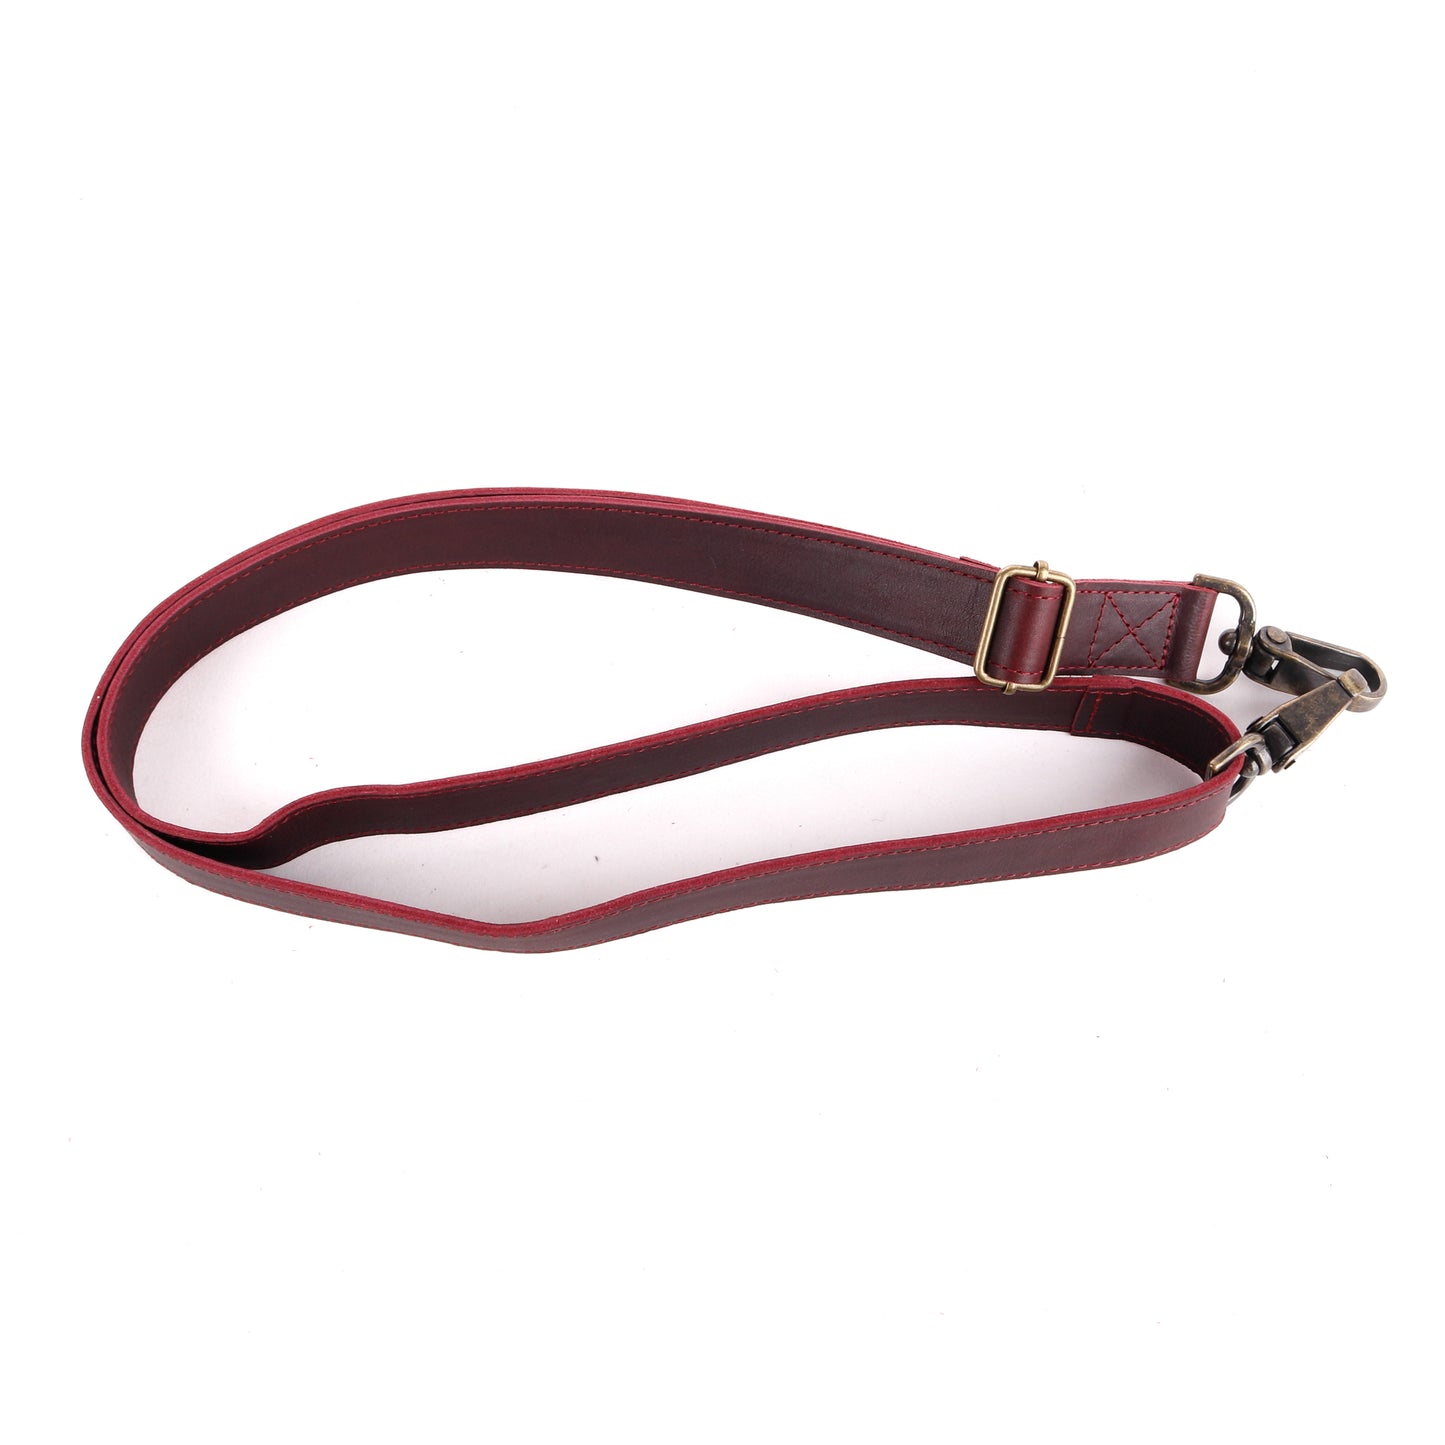 CROSSBODY SLING 2.0 - FULL LEATHER WITH SHEARLING - VINO TINTO